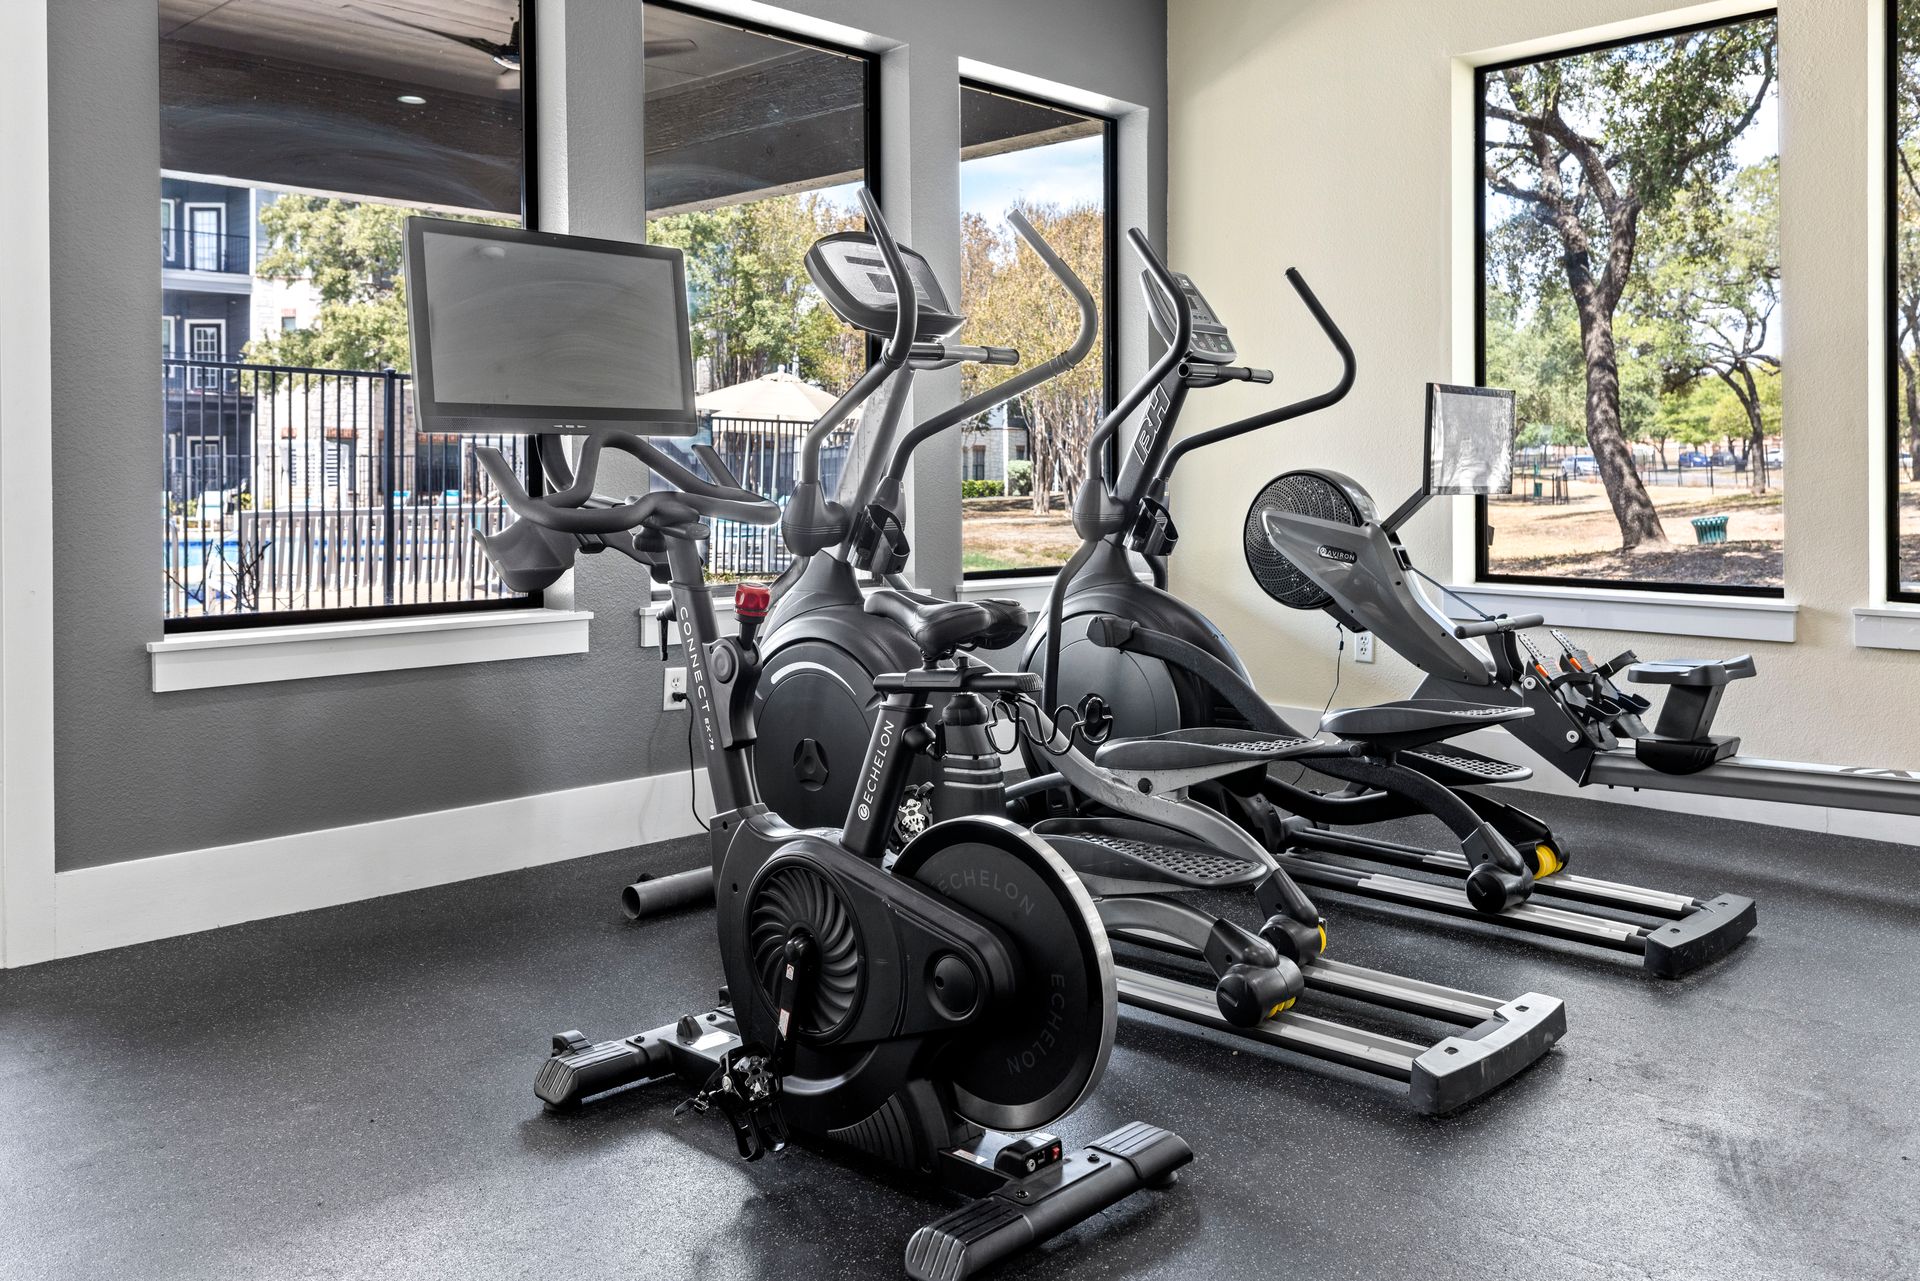 Fitness center at The Legend.